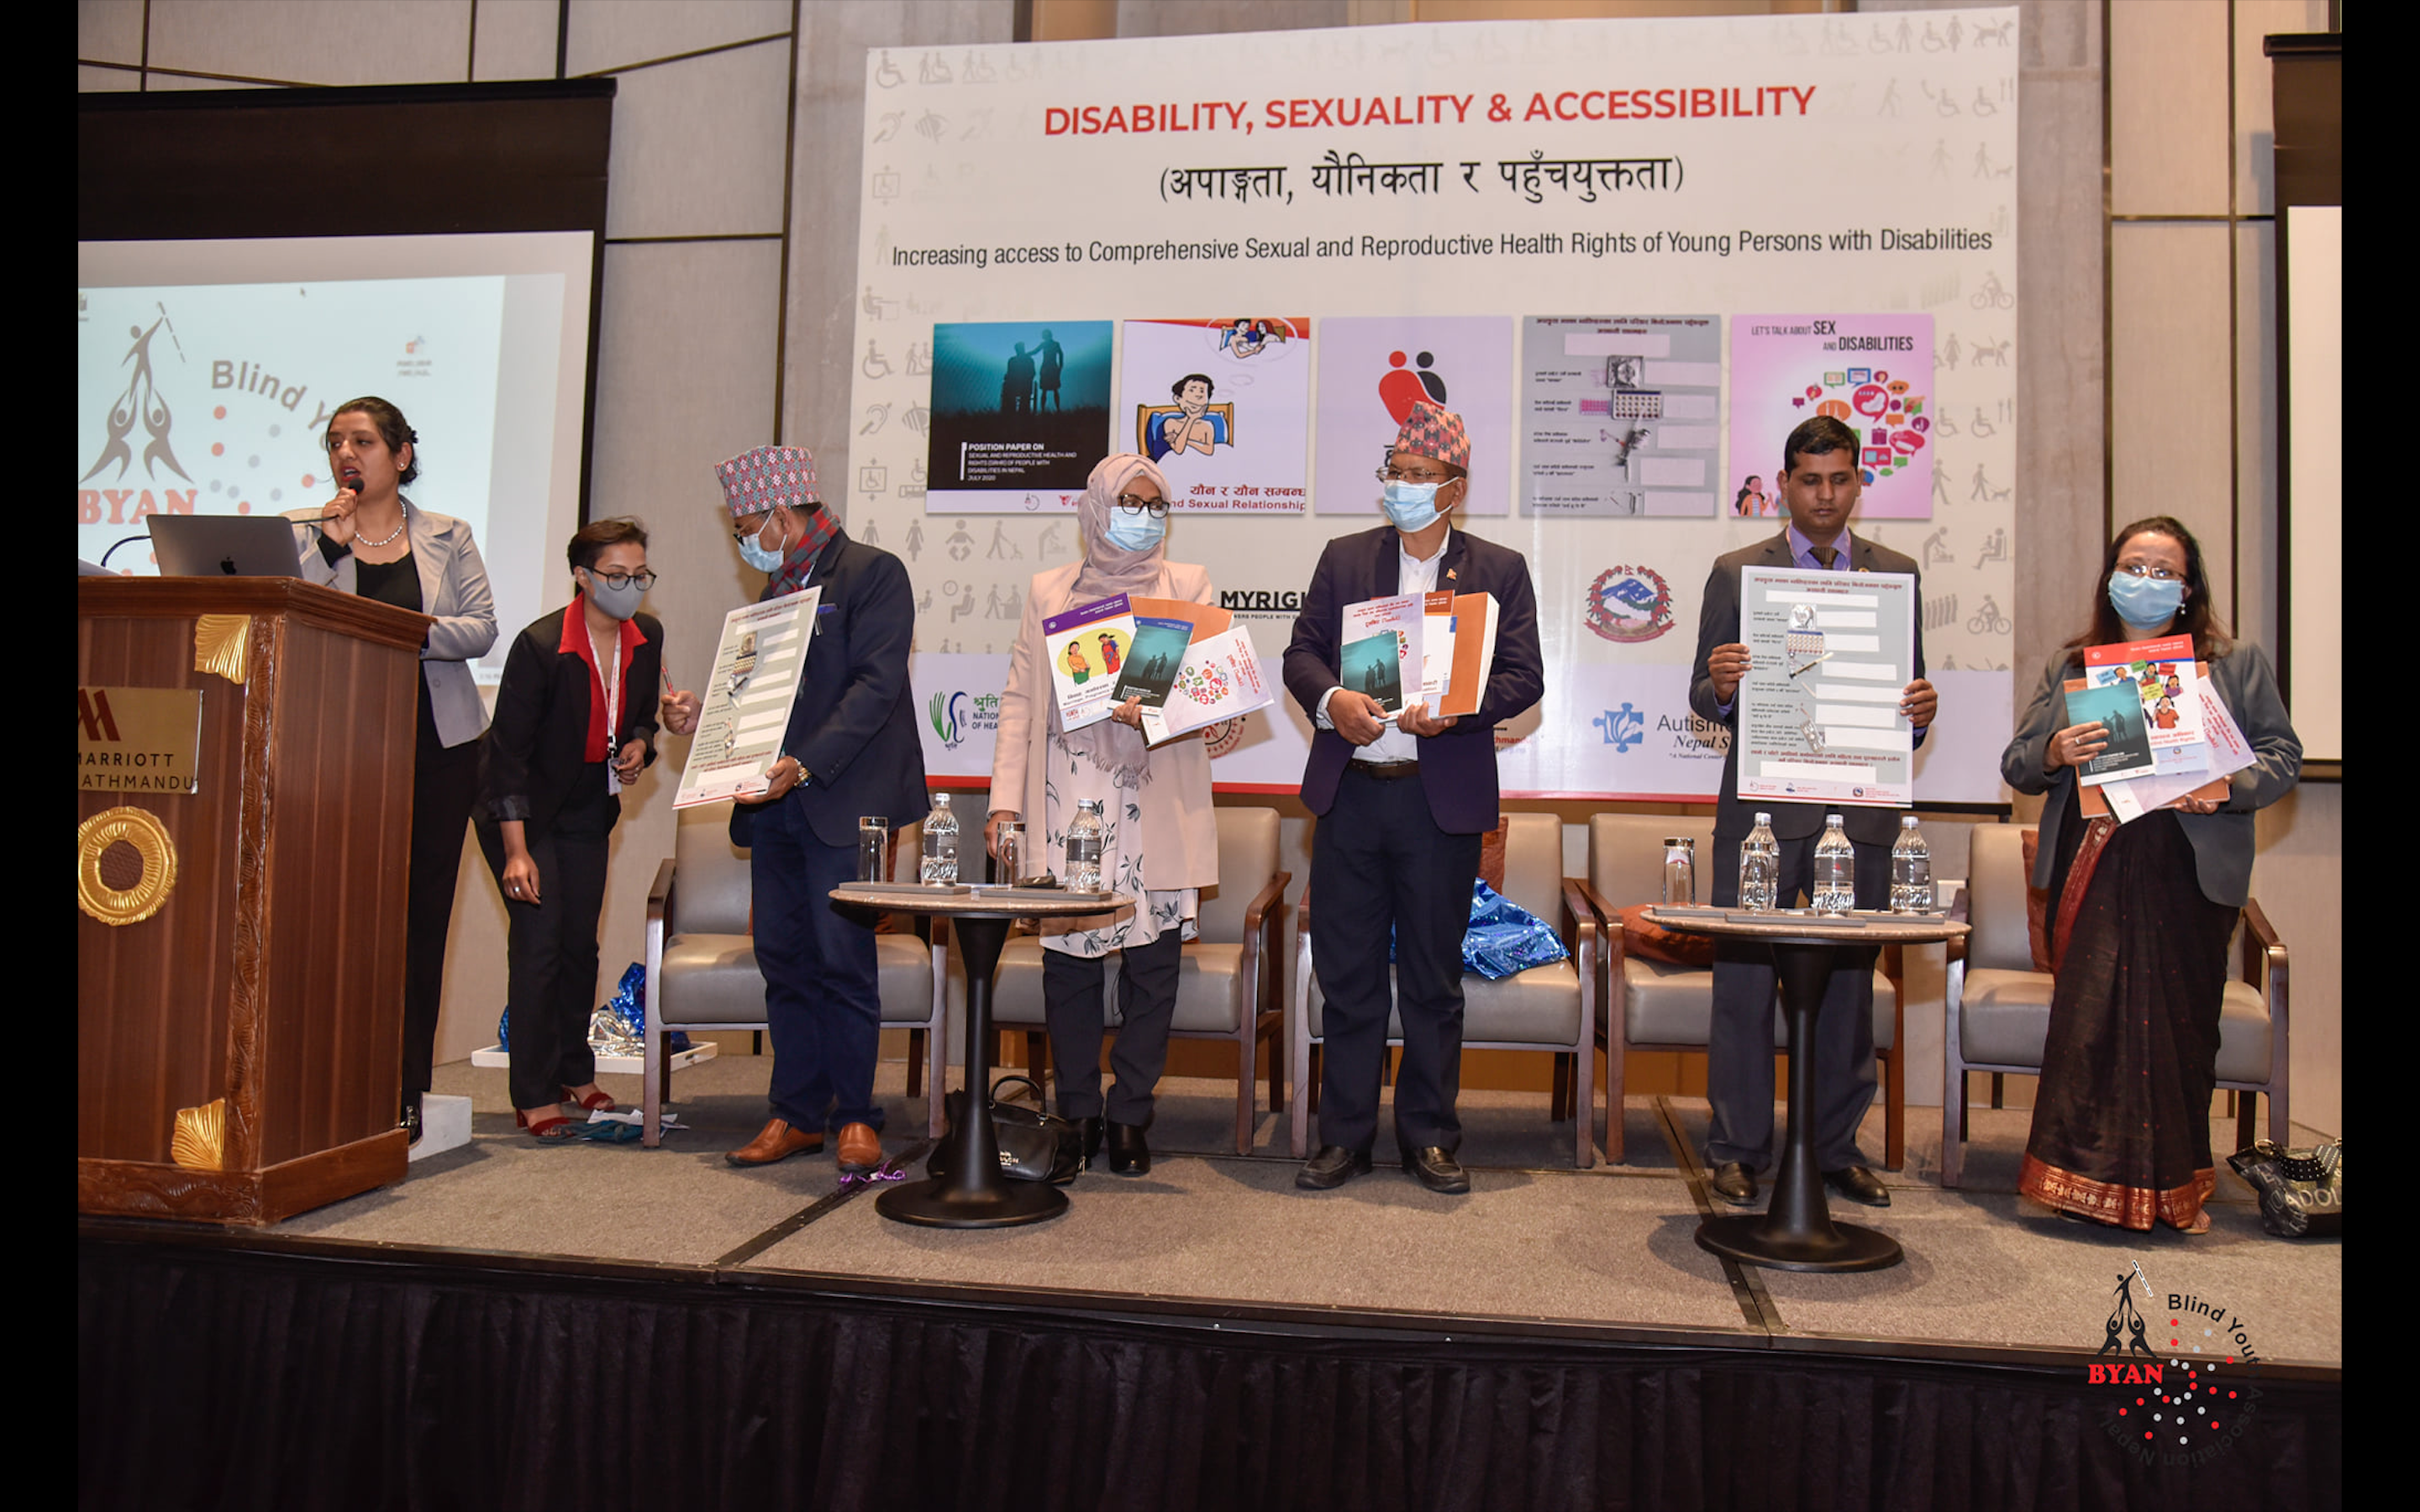 7 persons(4 female) in the stage disseminating accessible IEC